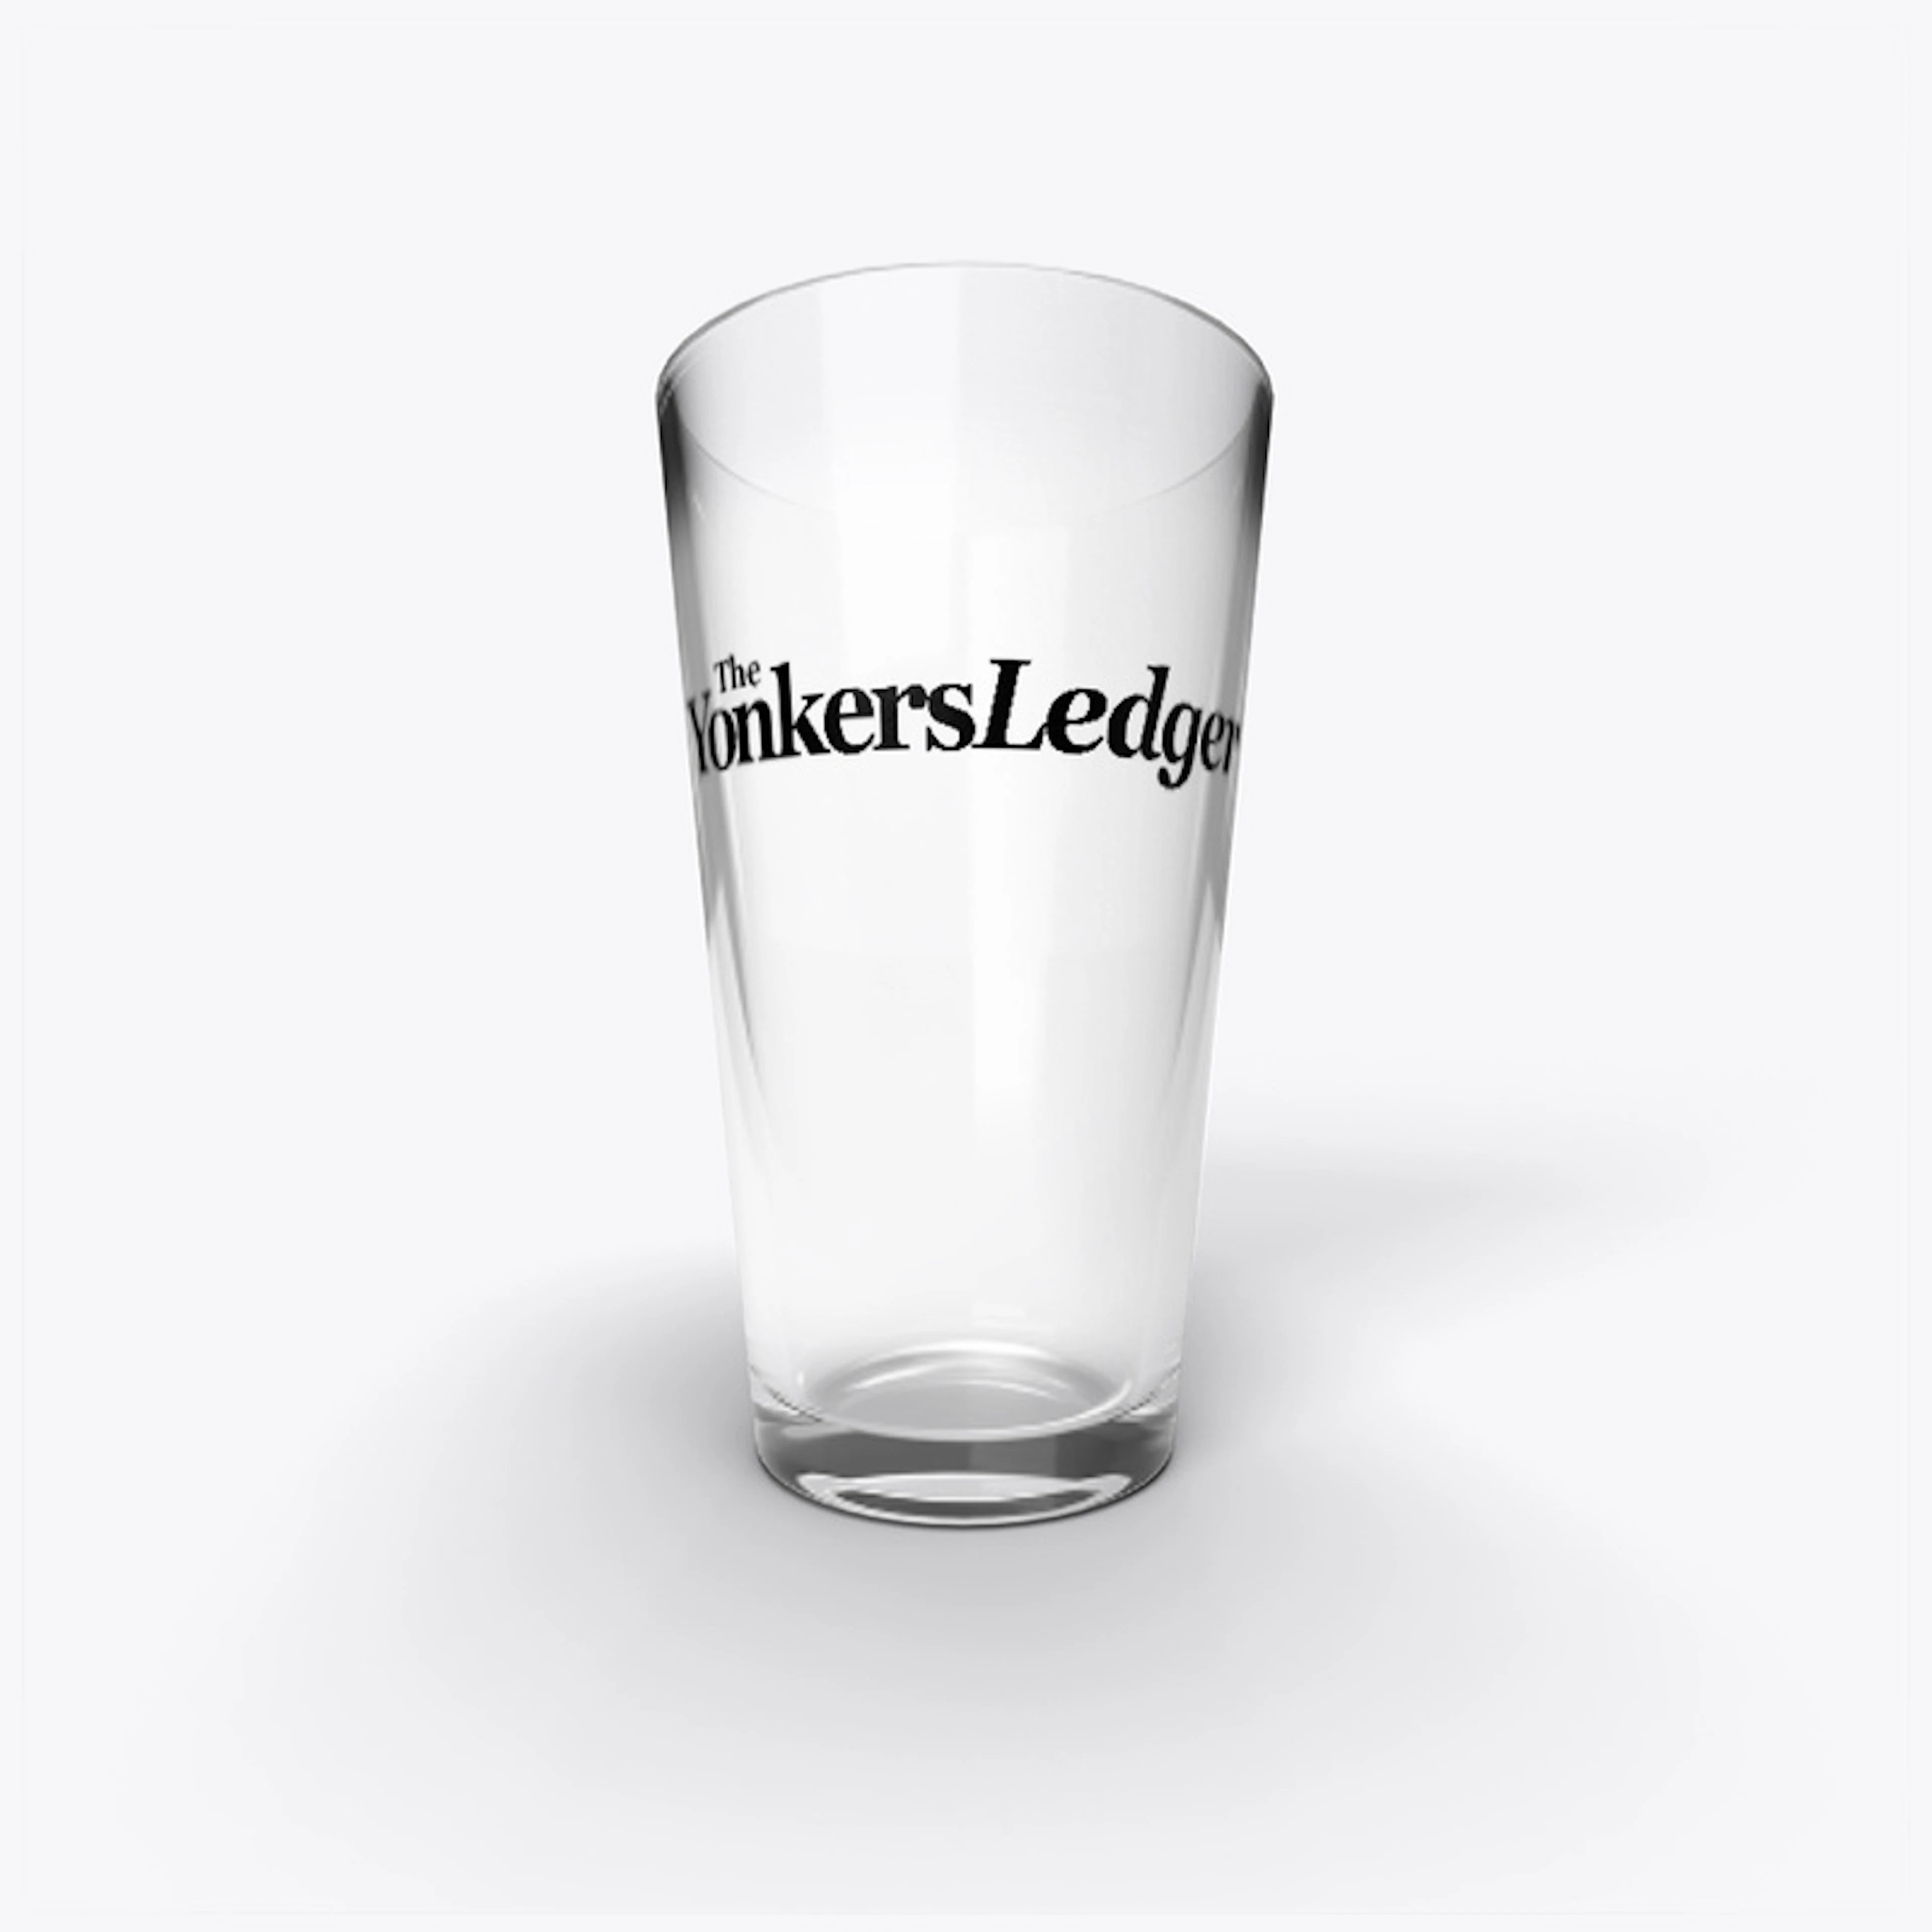 The Yonkers Ledger Pint Glass